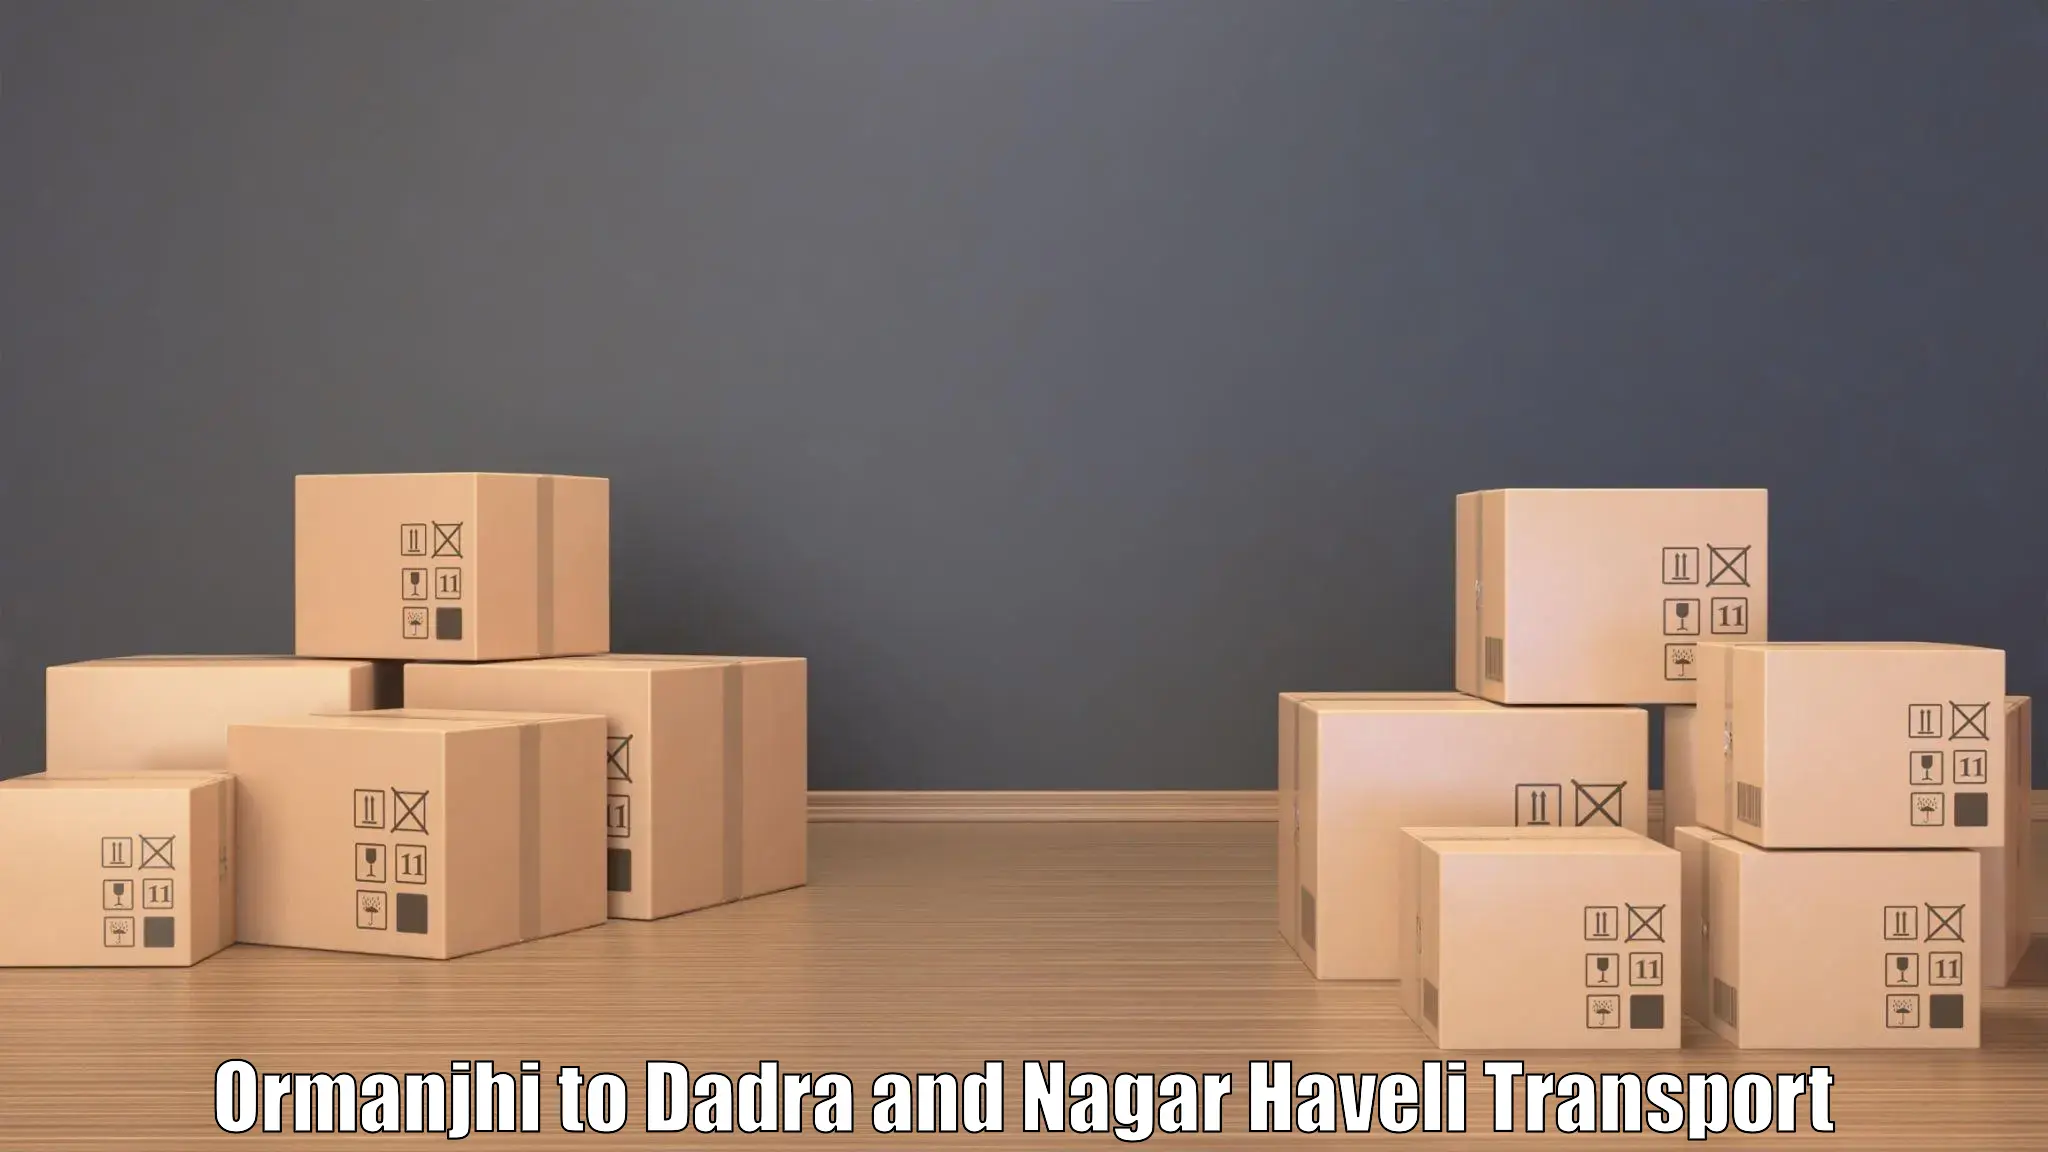 Transport bike from one state to another Ormanjhi to Dadra and Nagar Haveli